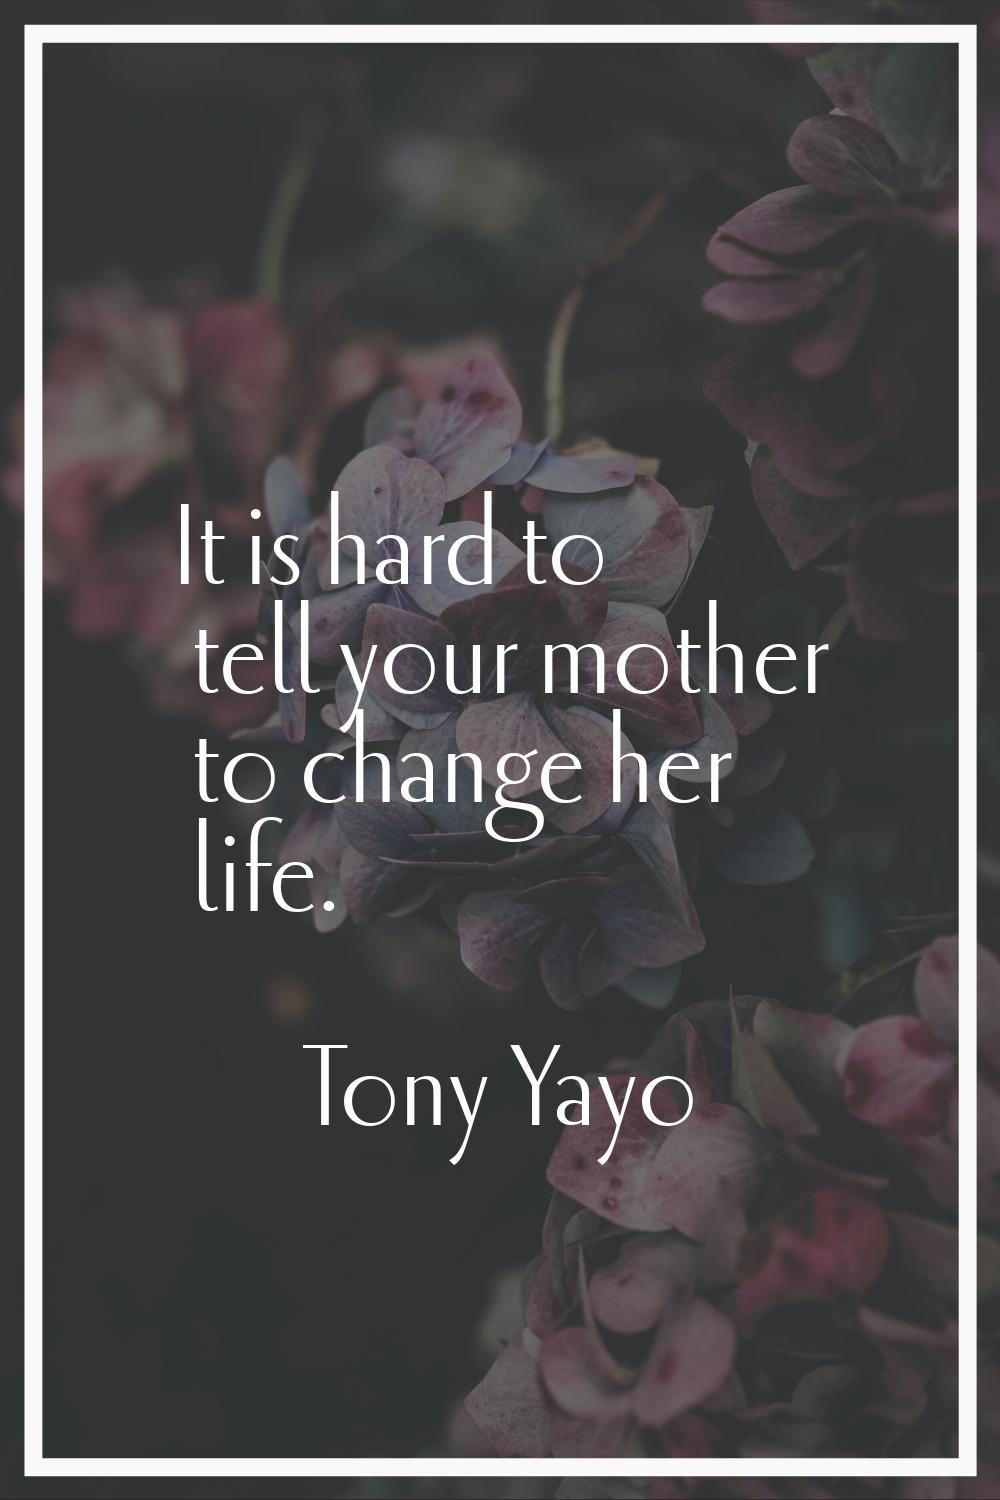 It is hard to tell your mother to change her life.